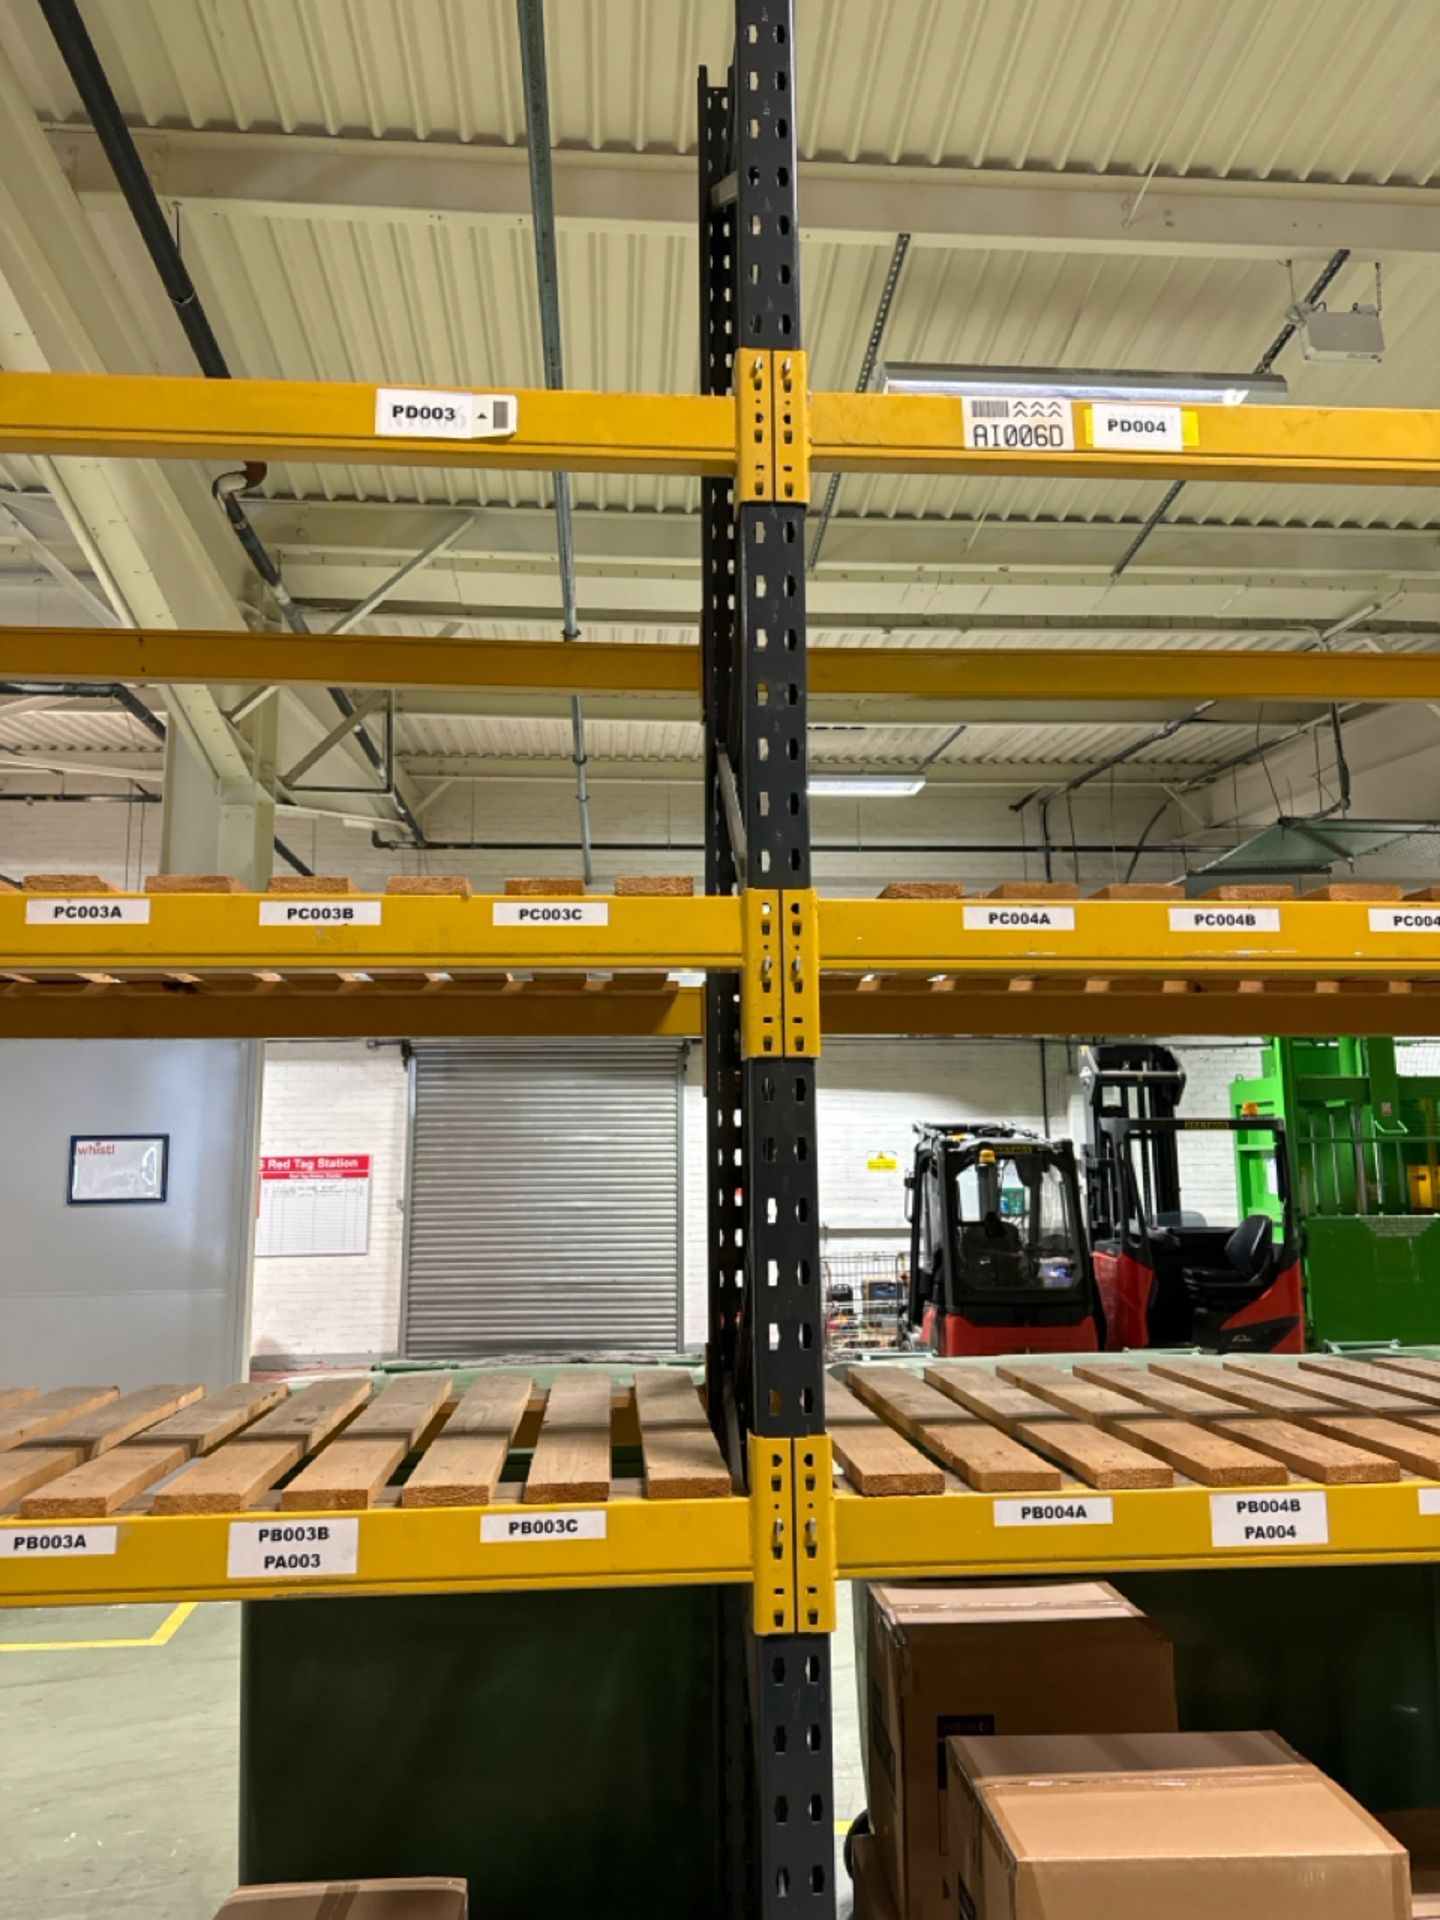 6 Bays Of Boltless Industrial Pallet Racking - Image 5 of 8